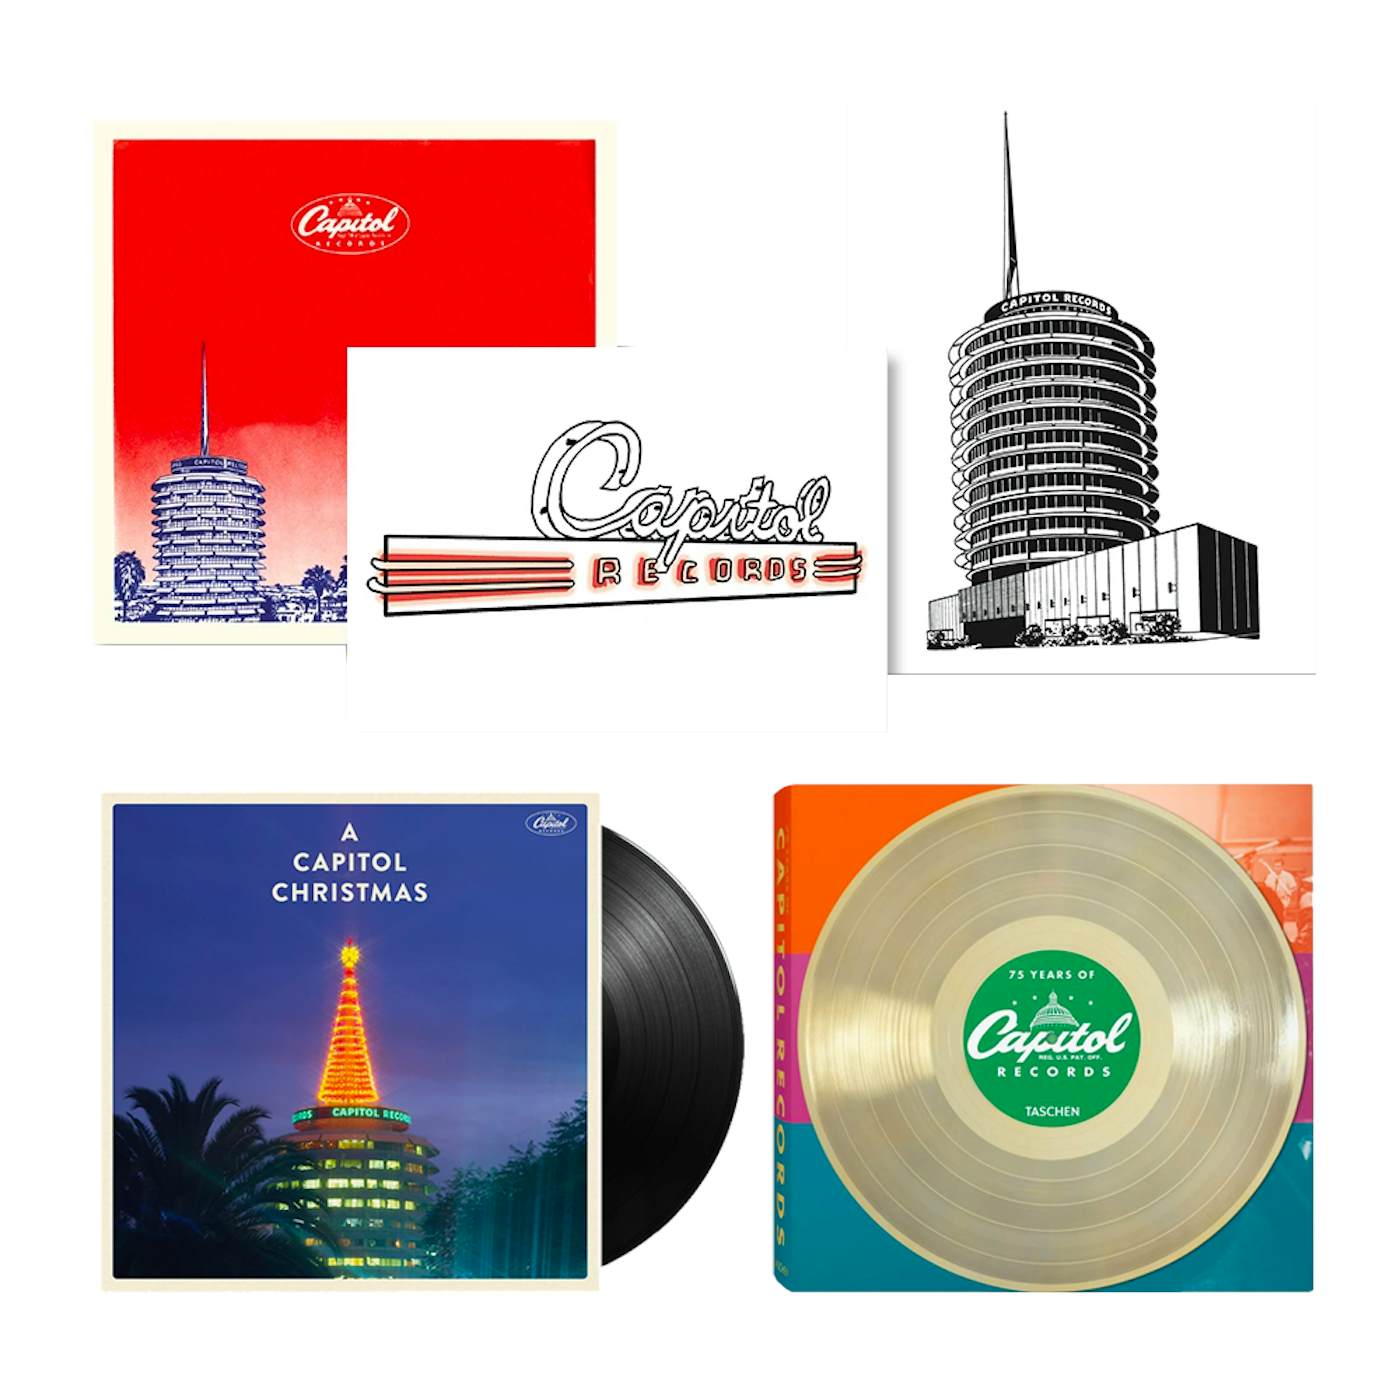 75 Years of Capitol Records Book + 3 Lithographs + A Capitol Christmas LP (Vinyl)